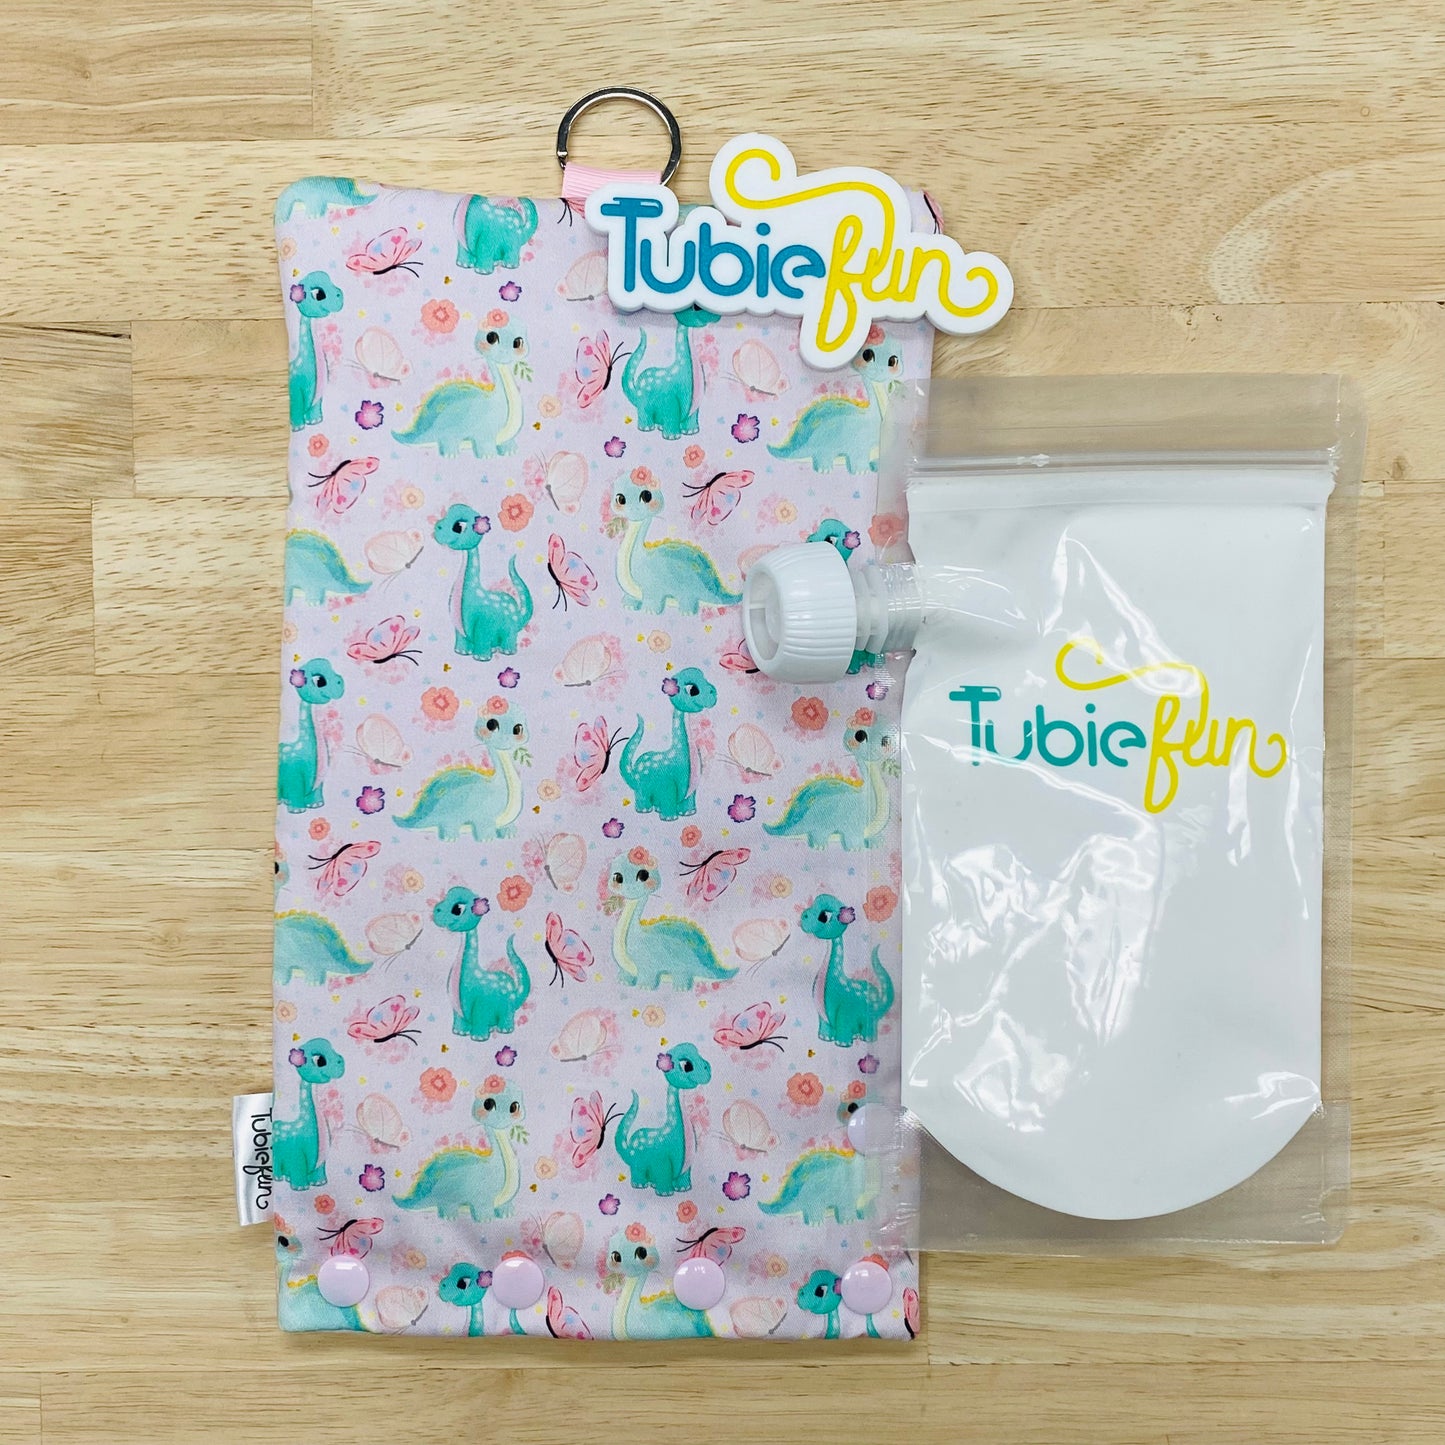 Insulated Milk Bag Suitable for Tubie Fun 500ml Reusable Pouches - Dino's and Butterflies